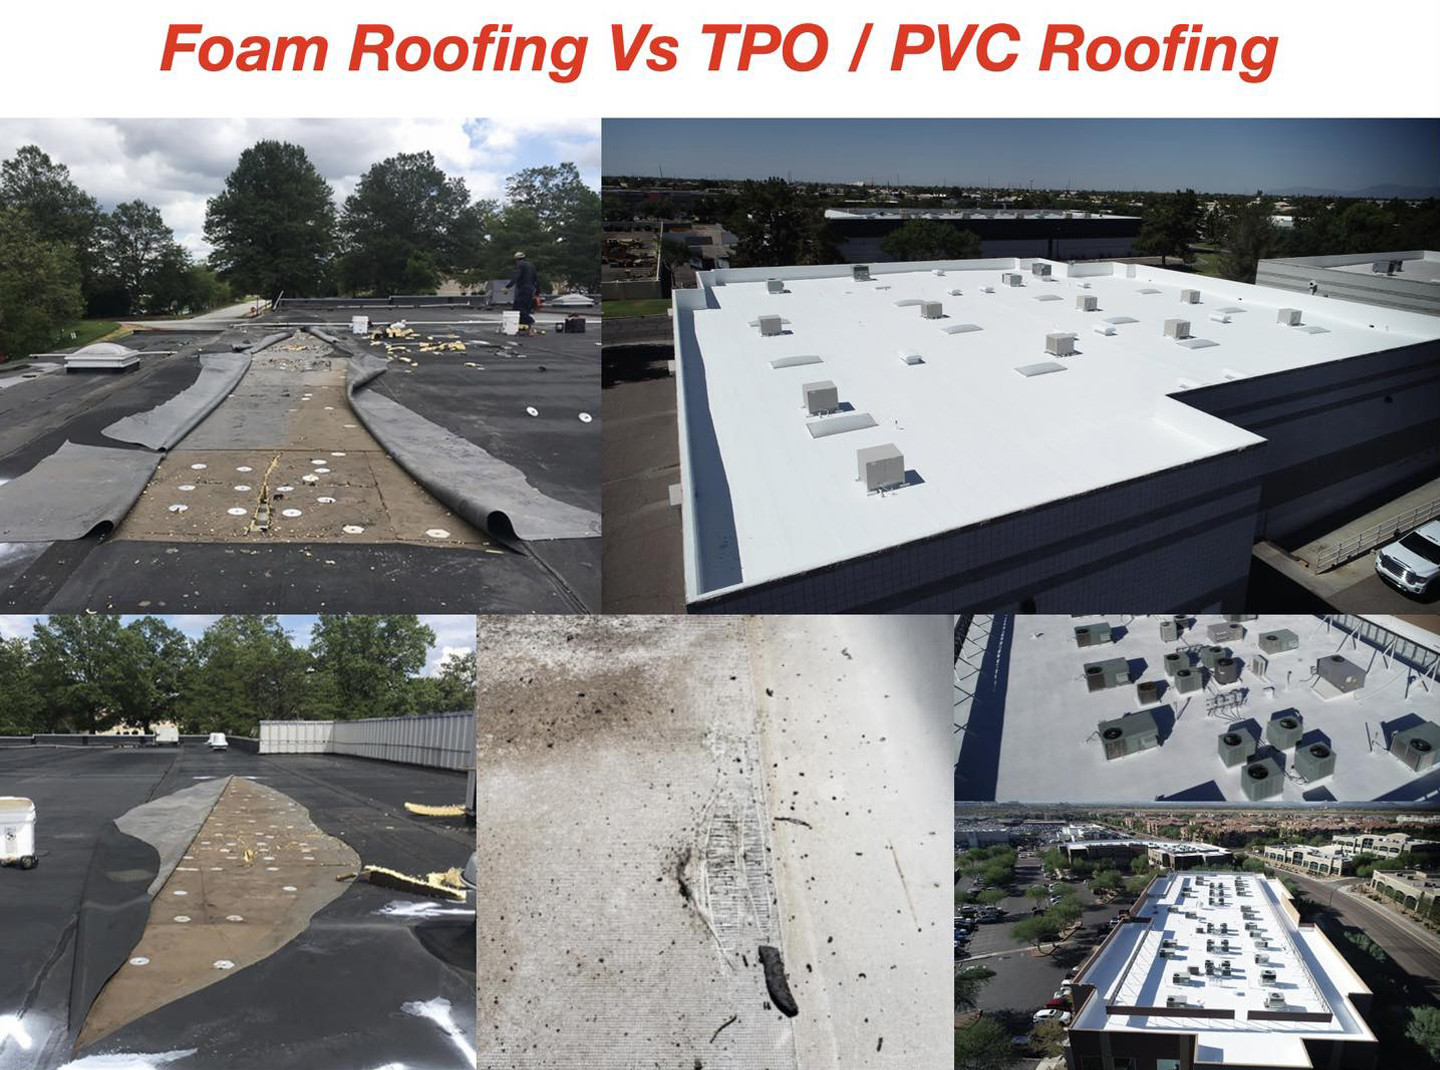 Learn about the benefits of foam roofing in Arizona vs some common issues with TPO OR PVC roofing